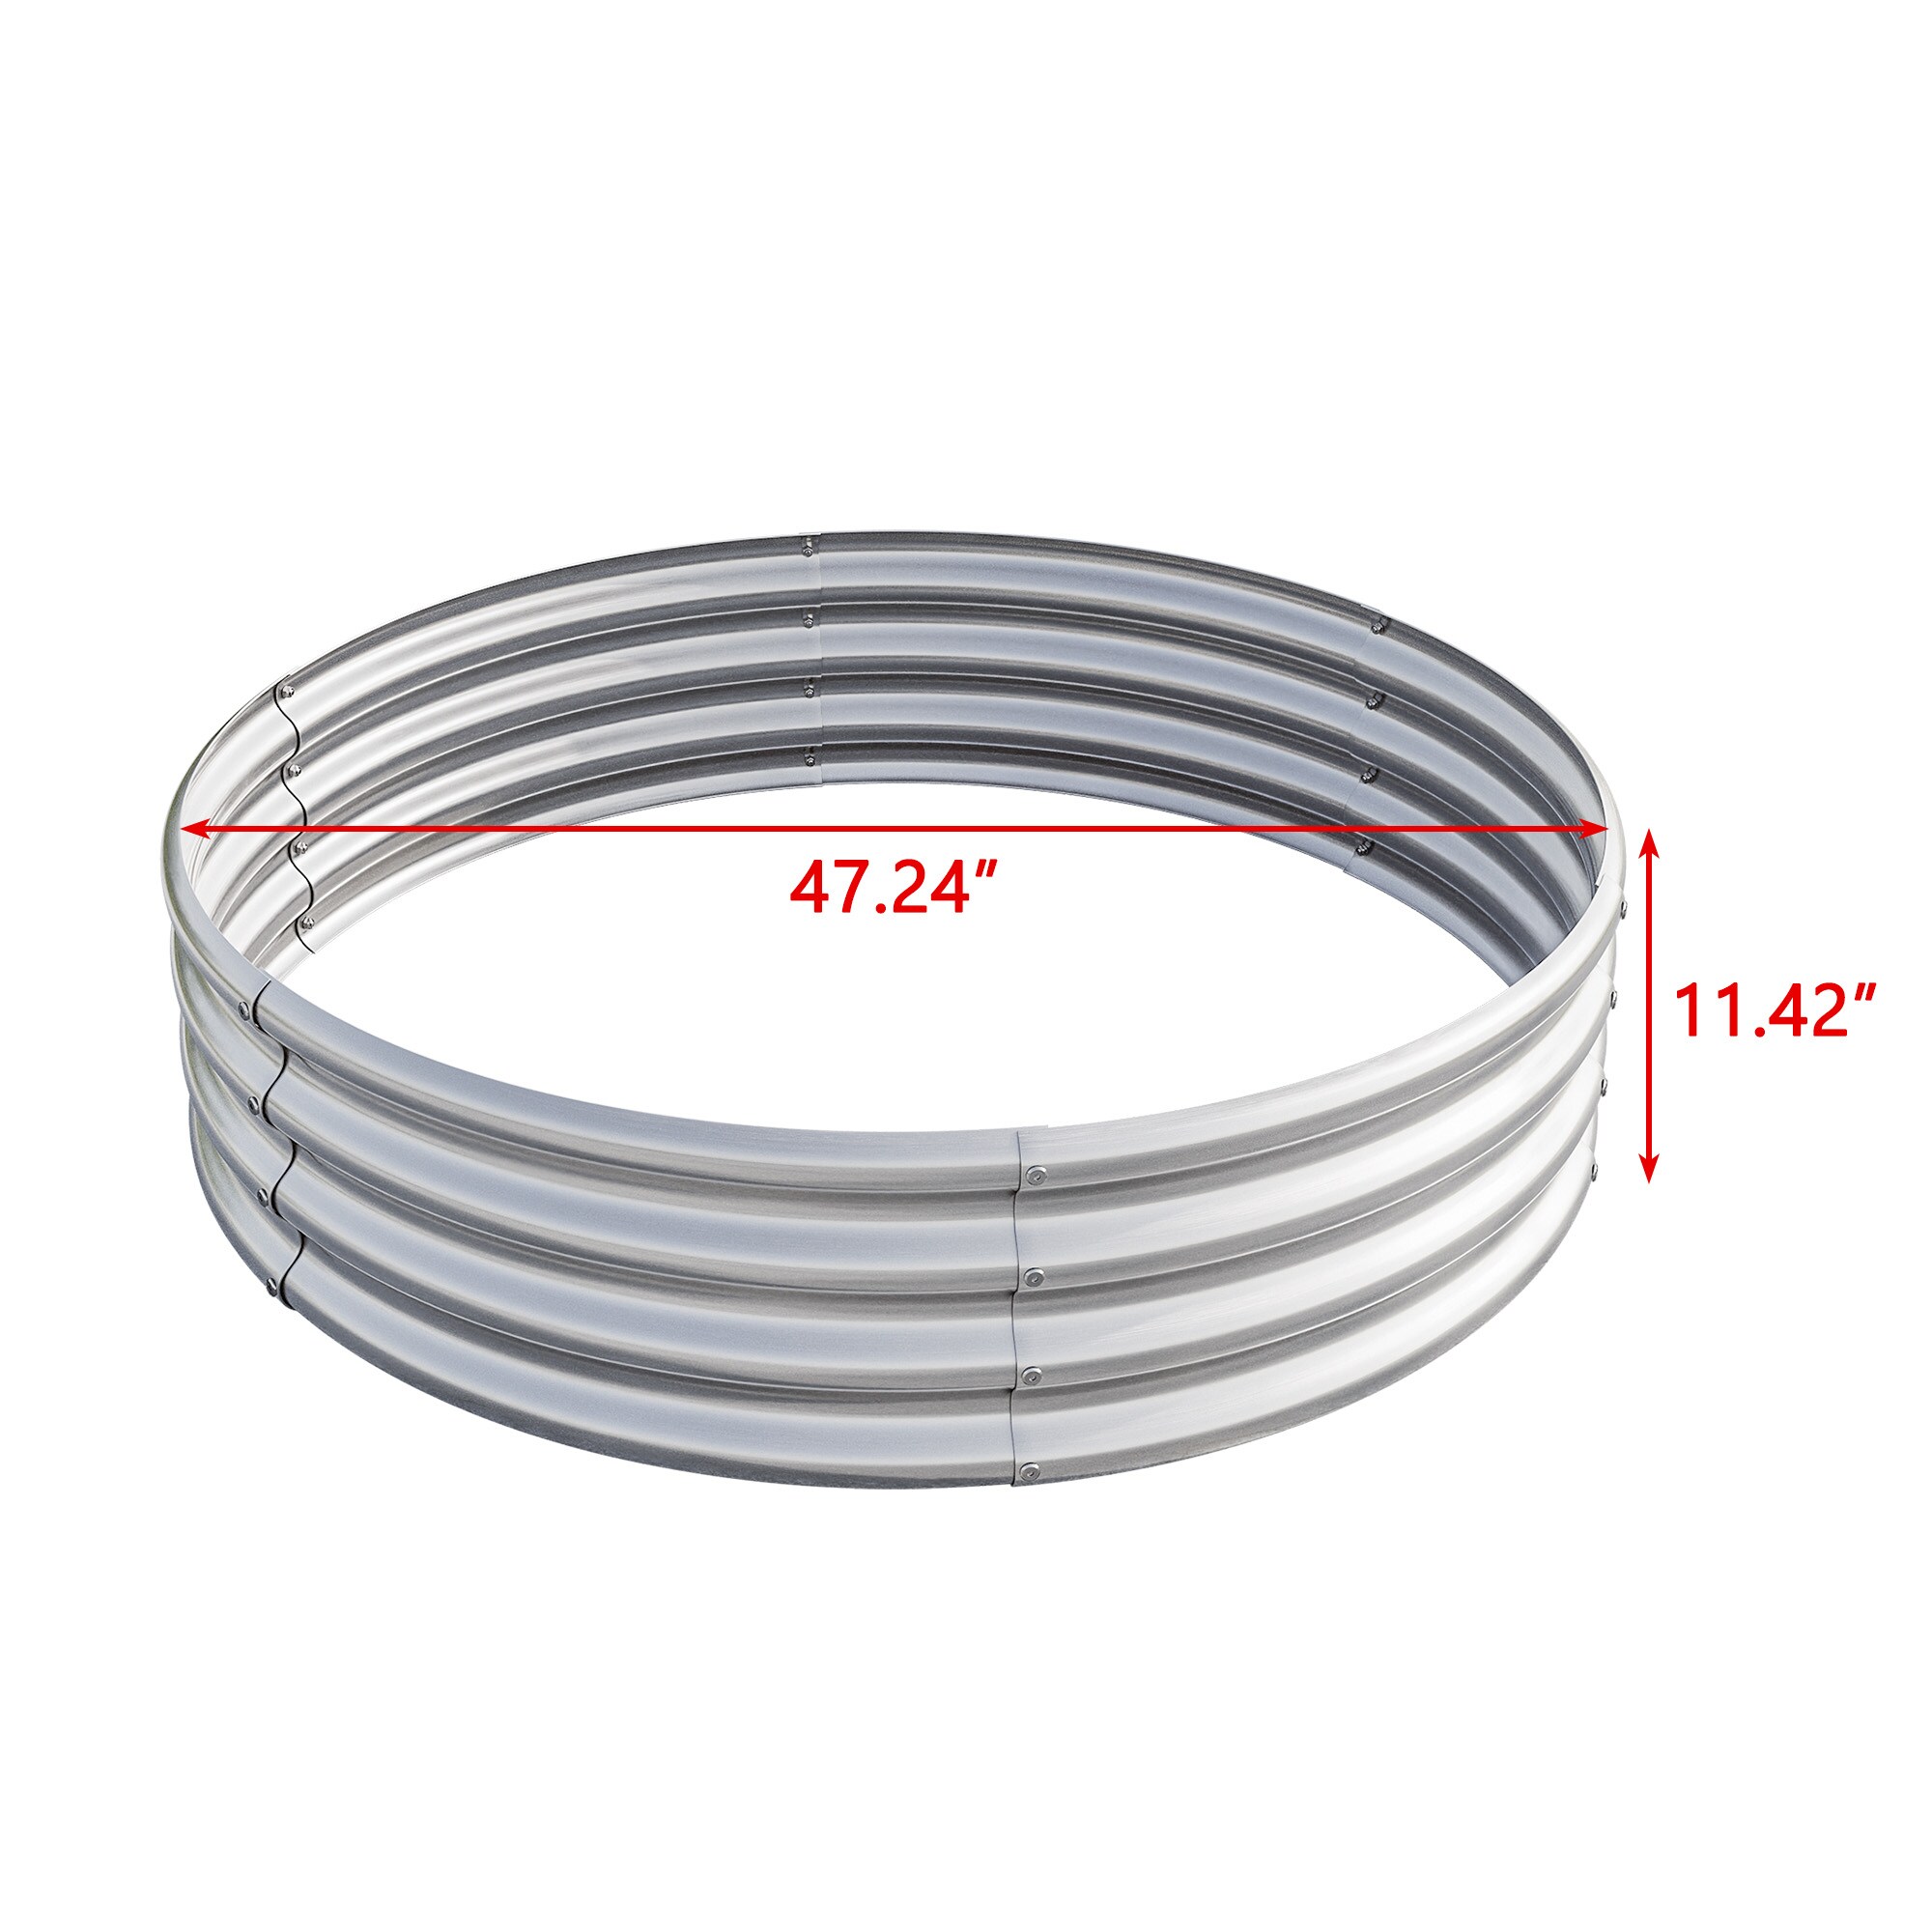 Behlen Country 36 in. x 12 in. Round Galvanized Steel Wood Fire Ring  50601368 - The Home Depot